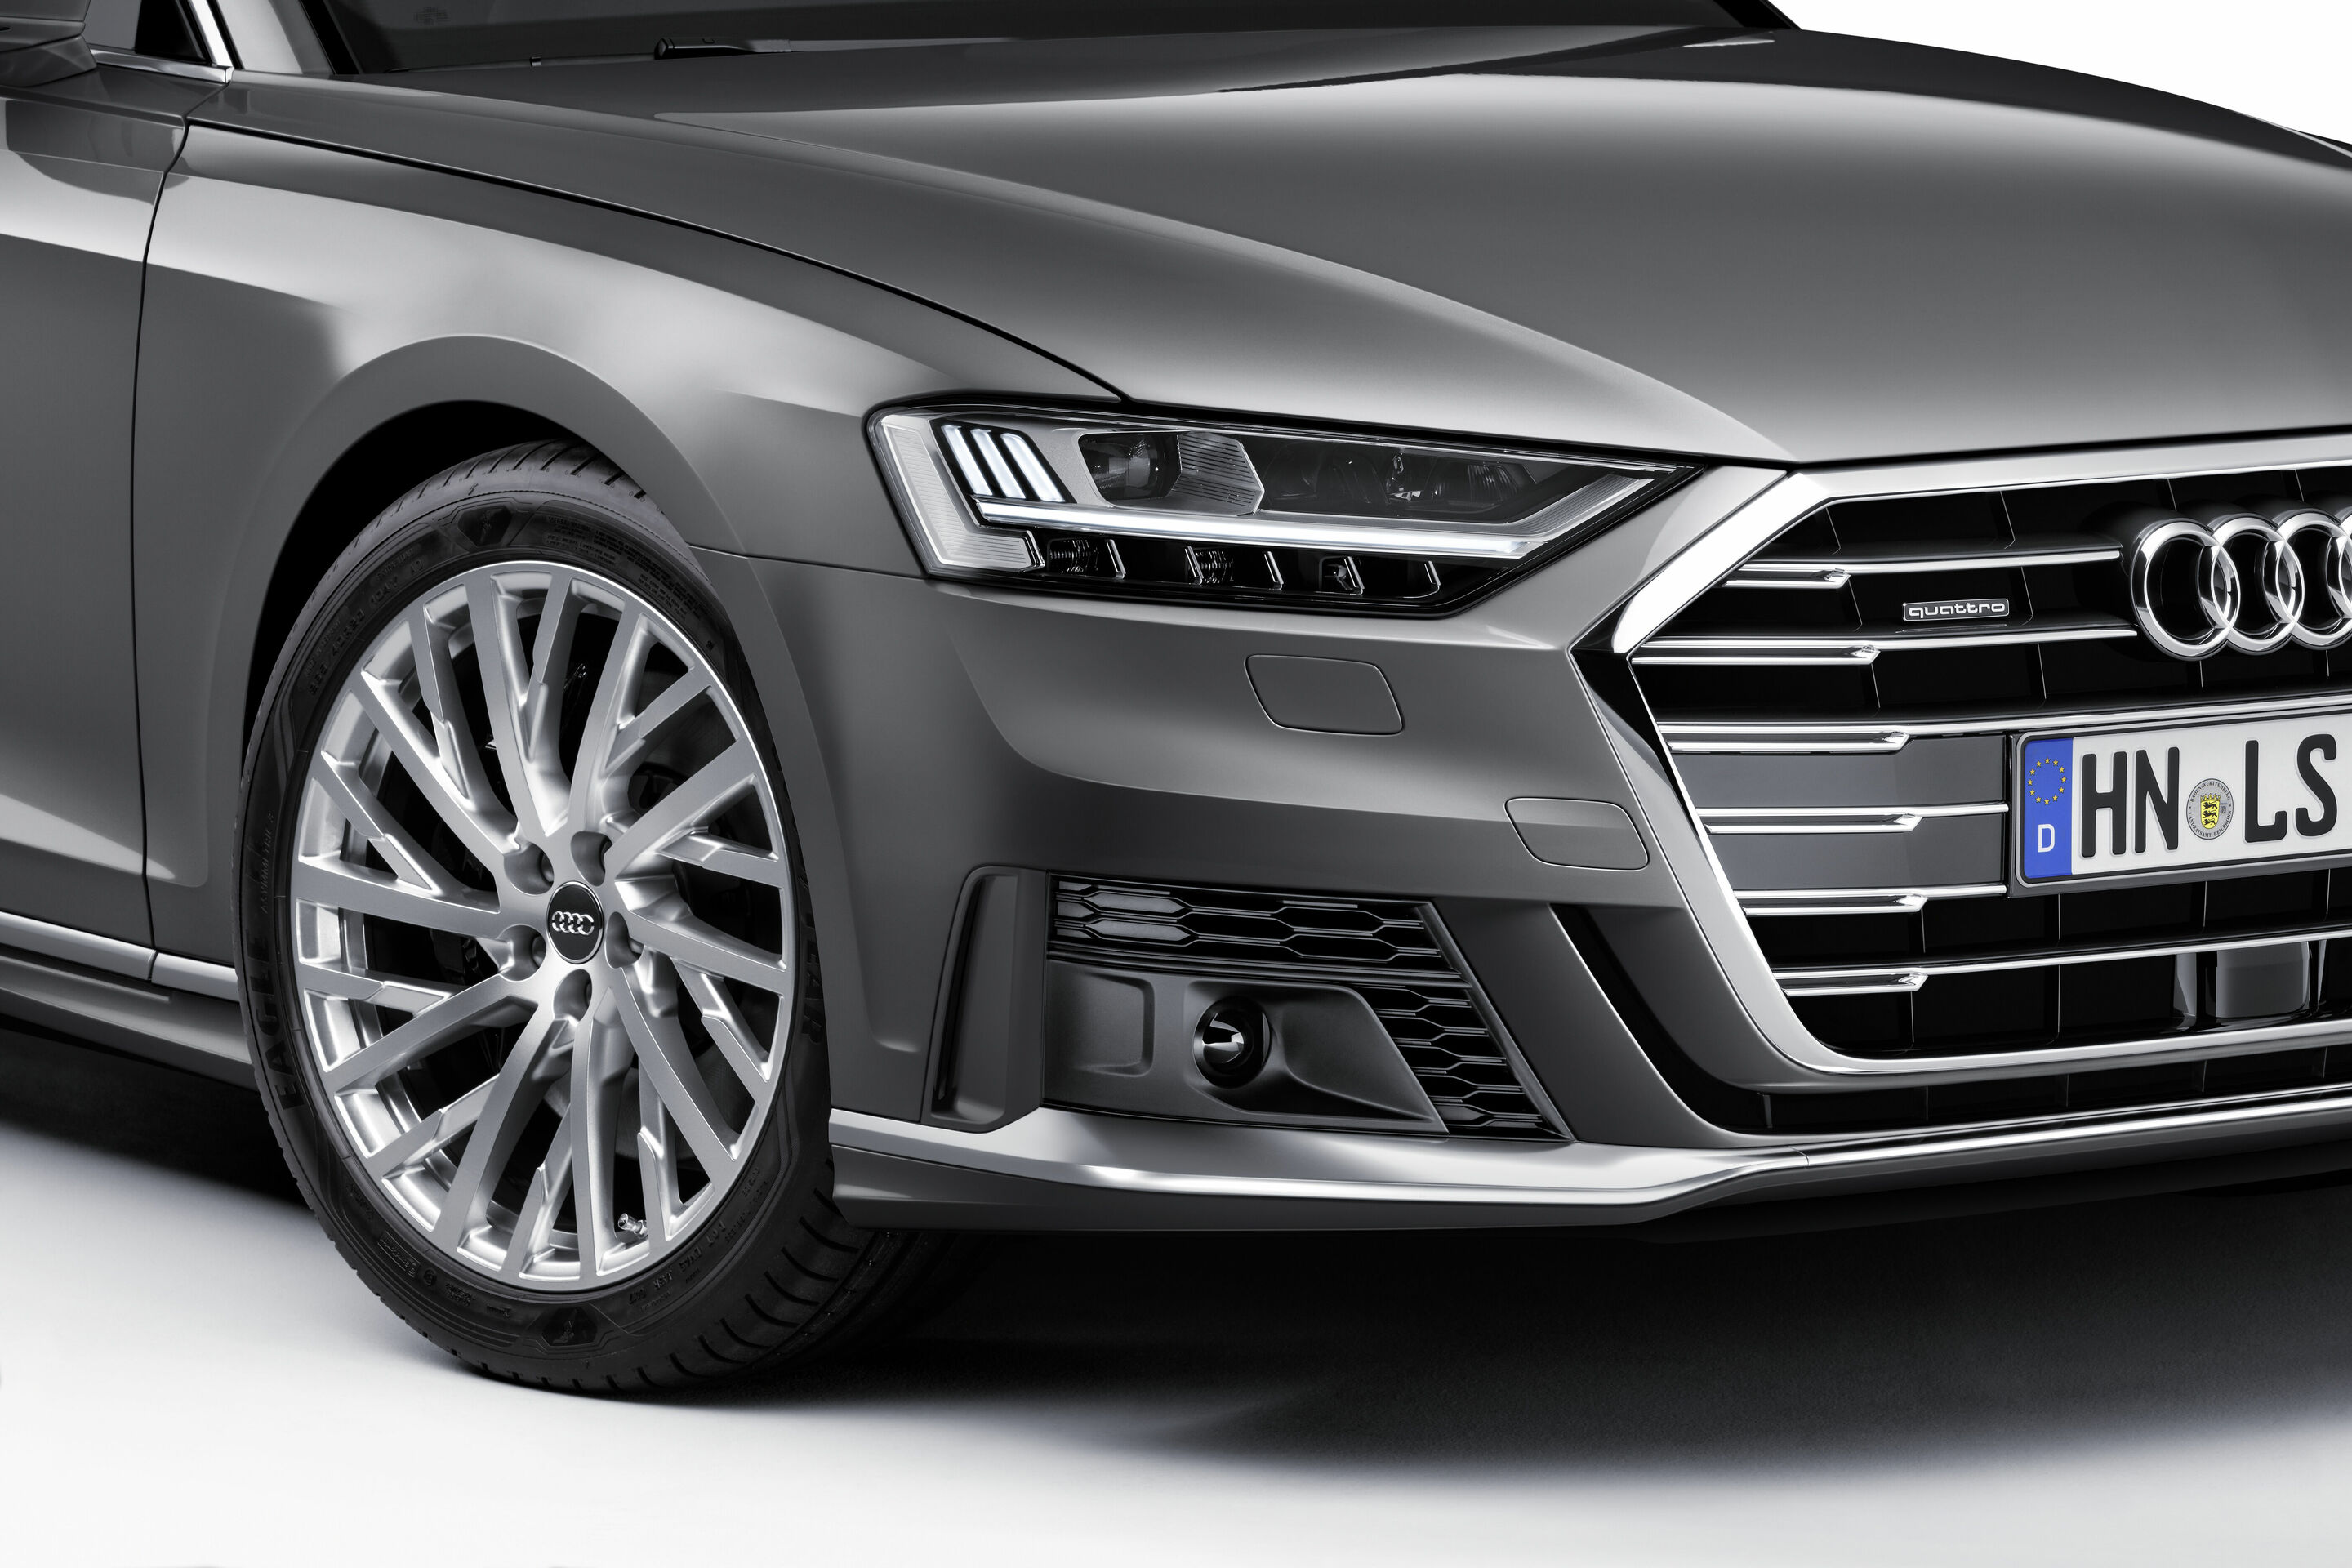 Audi A8 with sport exterior package